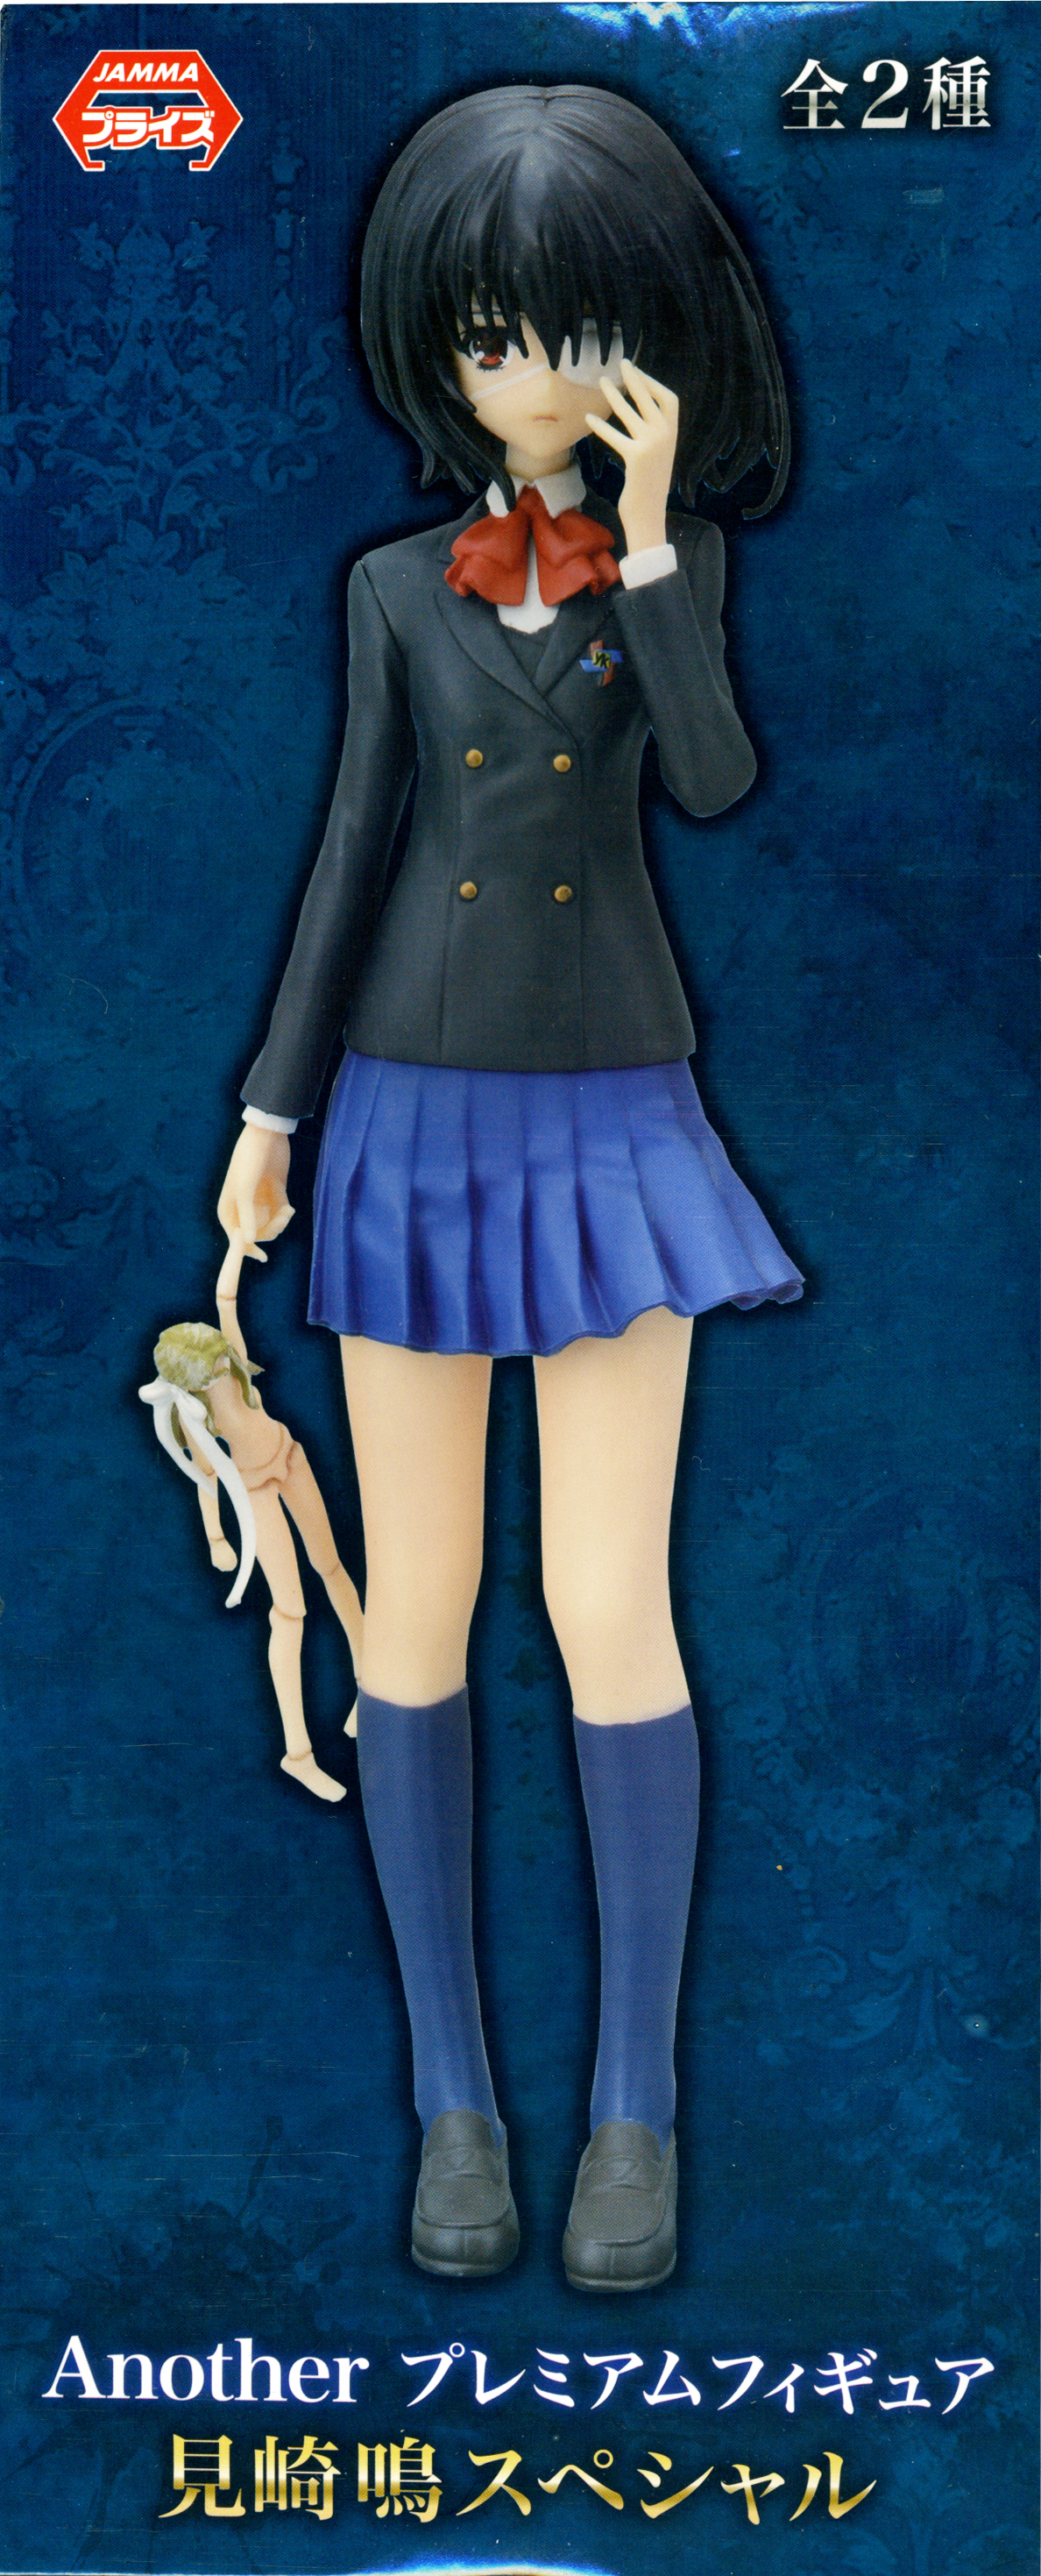 Misaki Mei, Premium Figure, with Eyepatch and Doll, JAMMA, Another, Sega